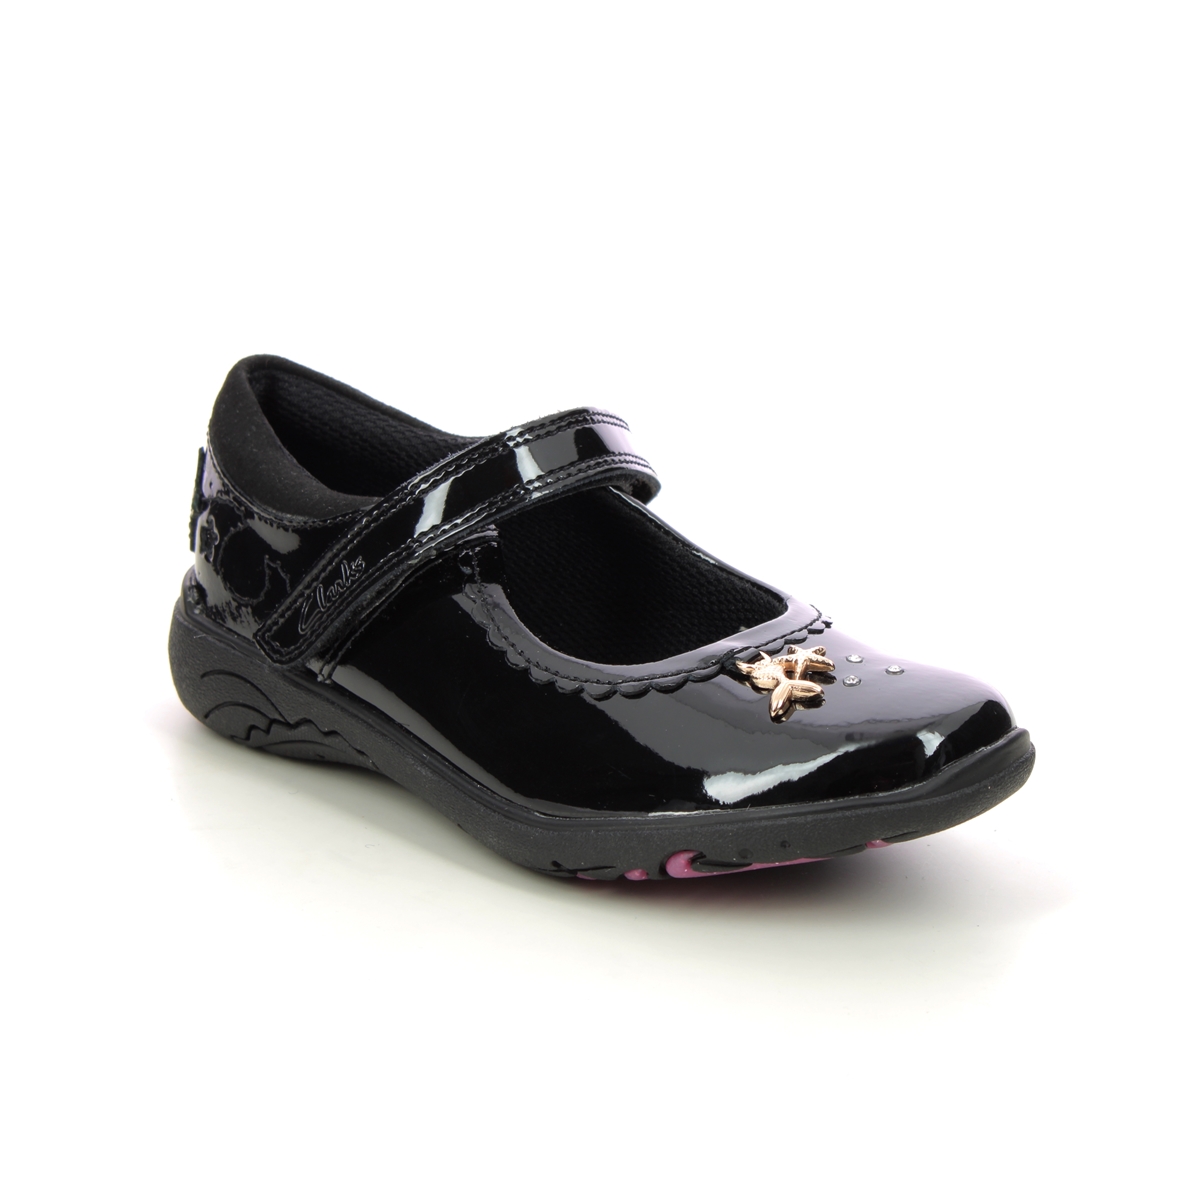 Clarks Relda Sea K Mary Jane Black Patent Kids Girls School Shoes 722416F In Size 1.5 In Plain Black Patent F Width Fitting Regular Fit For School For